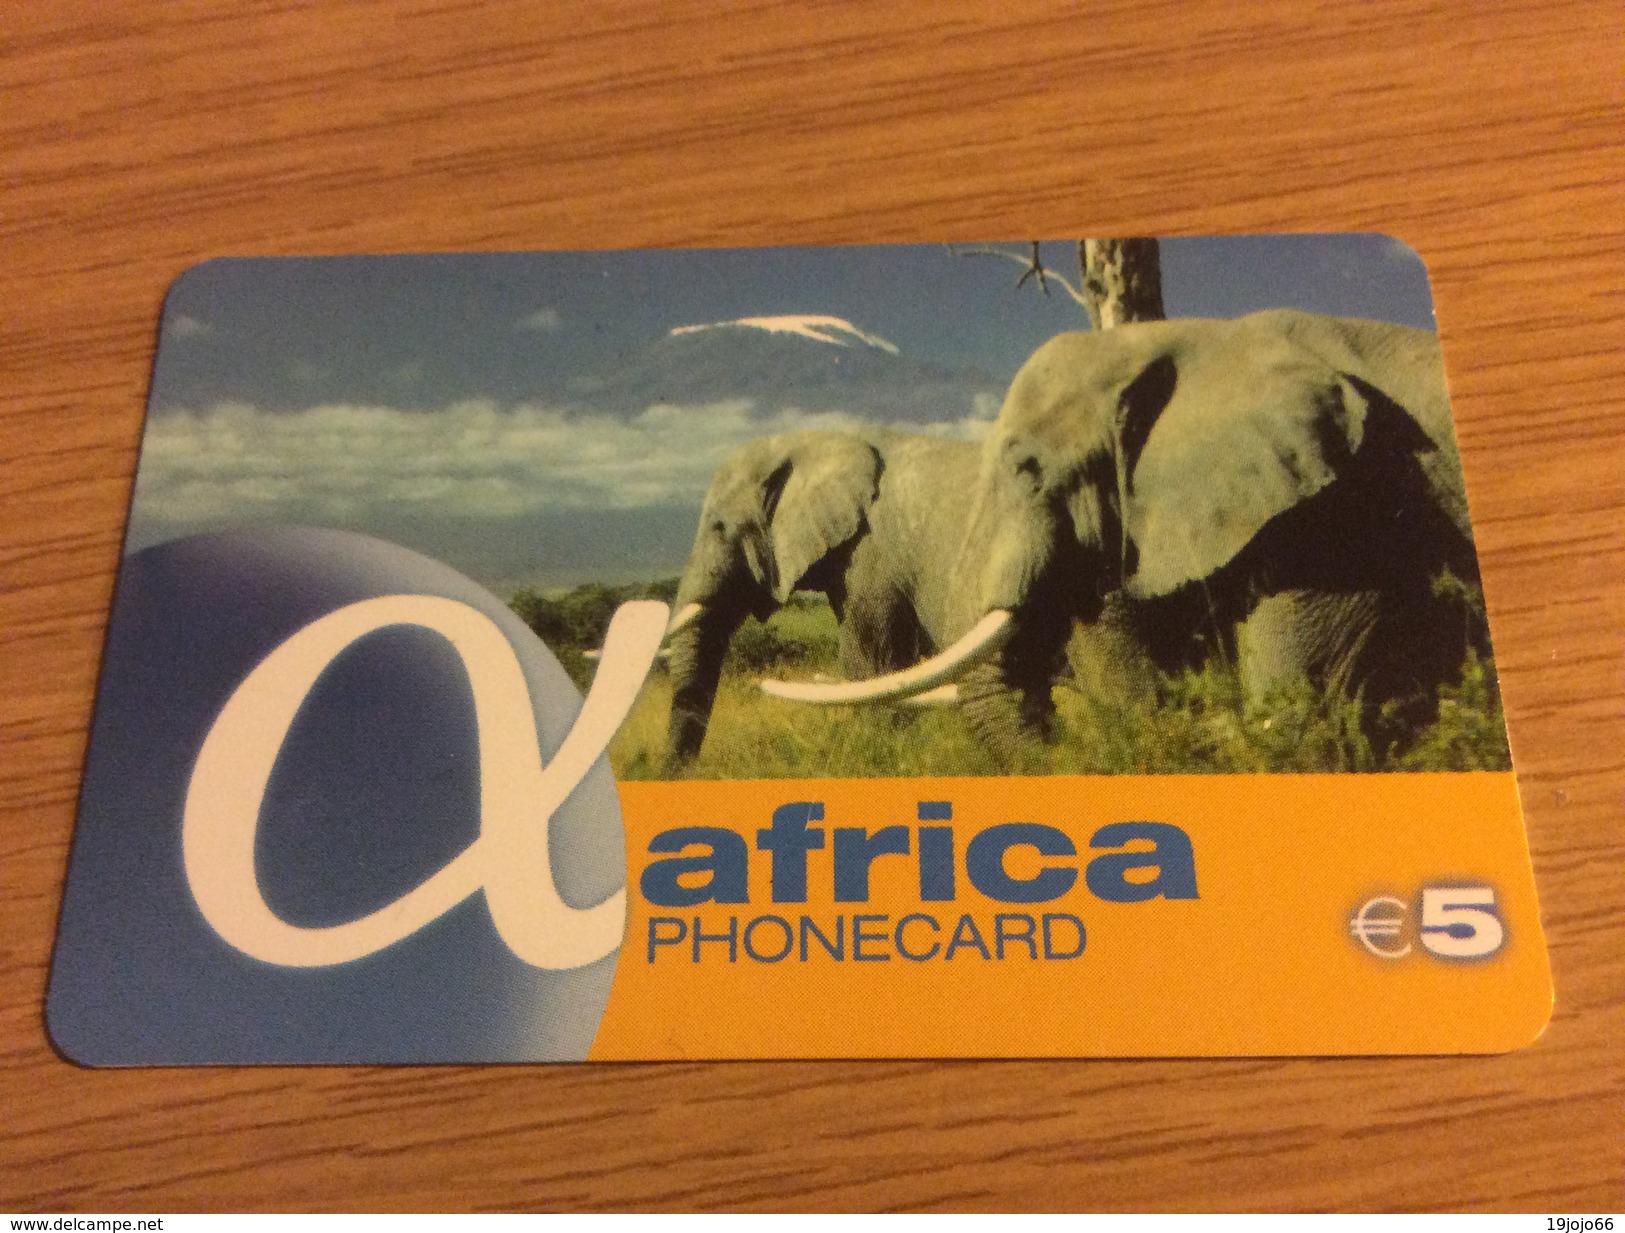 Africa Phone Card Elefants   - 5 Euro   - Little Printed  -   Used Condition - GSM, Cartes Prepayées & Recharges